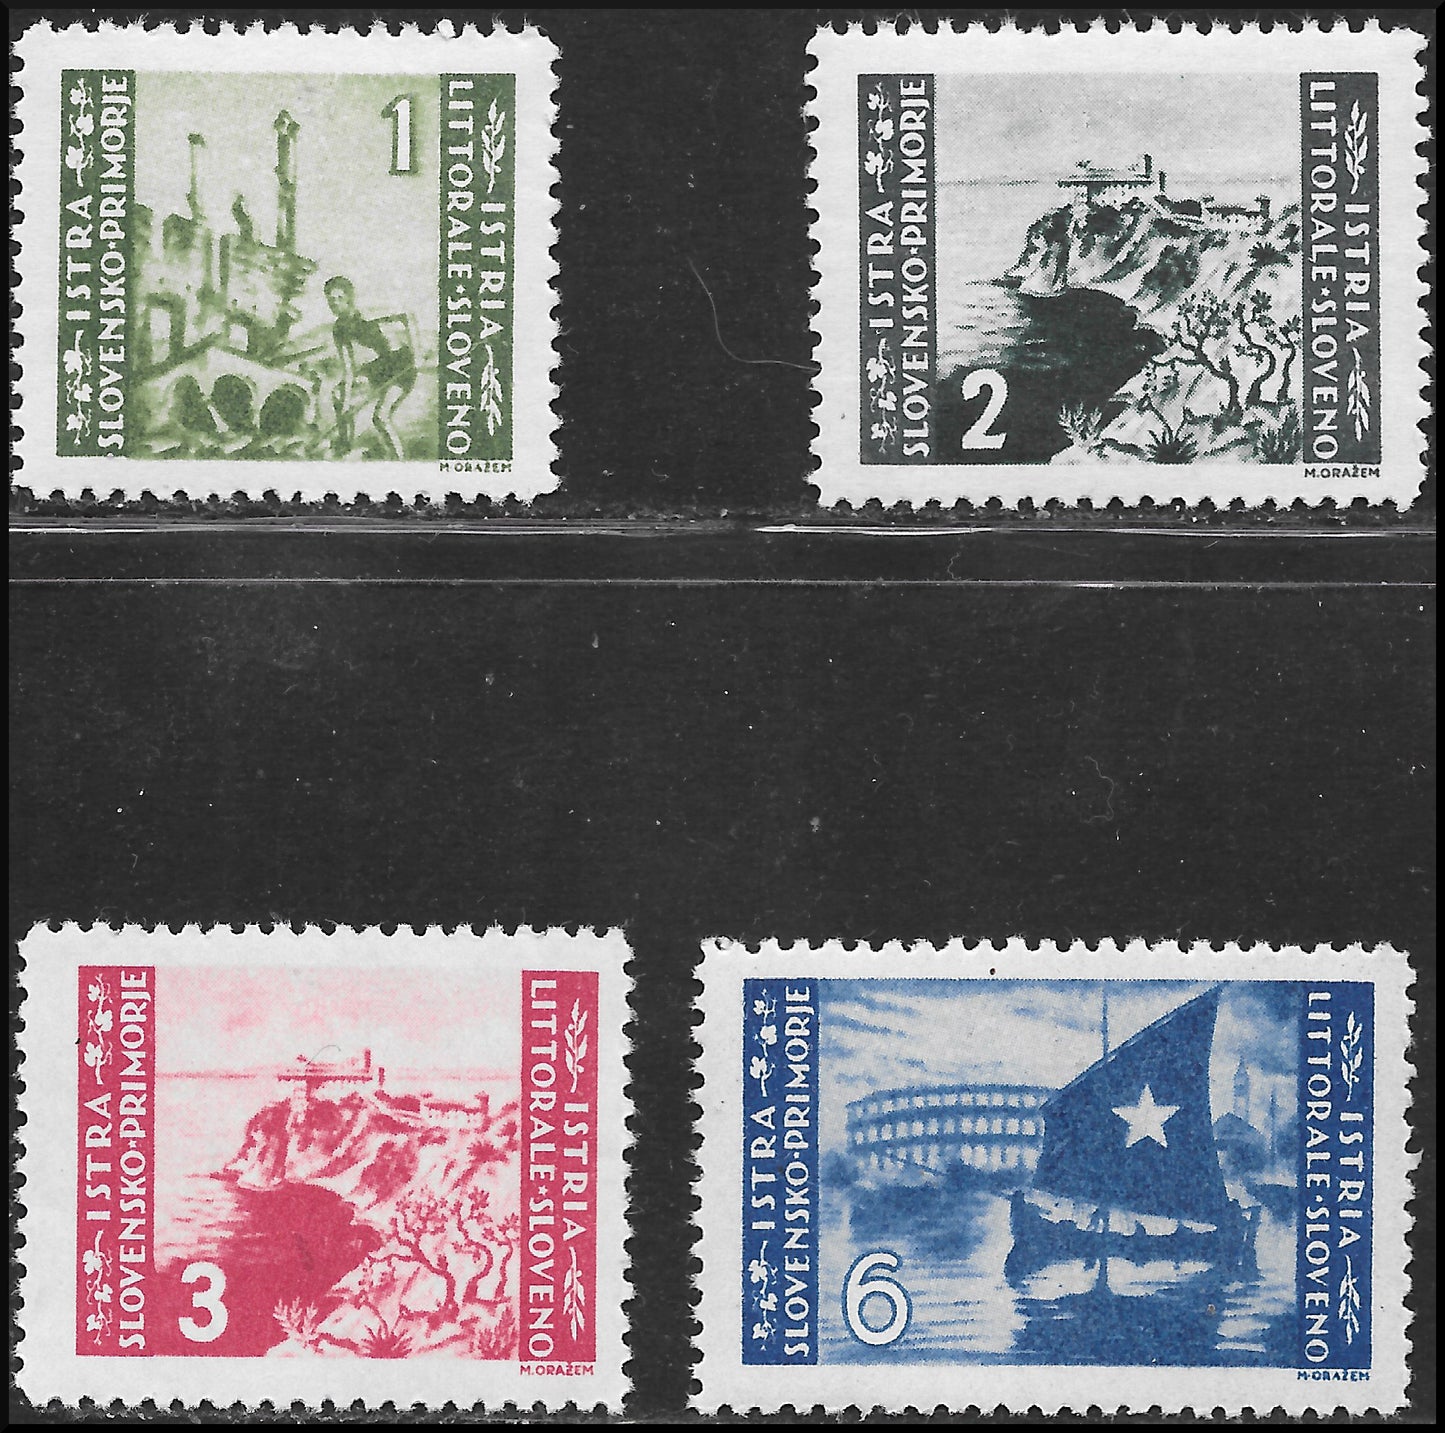 Bilingual issue, various subjects and formats, colors changed cpl series. of 4 new examples (63/66)